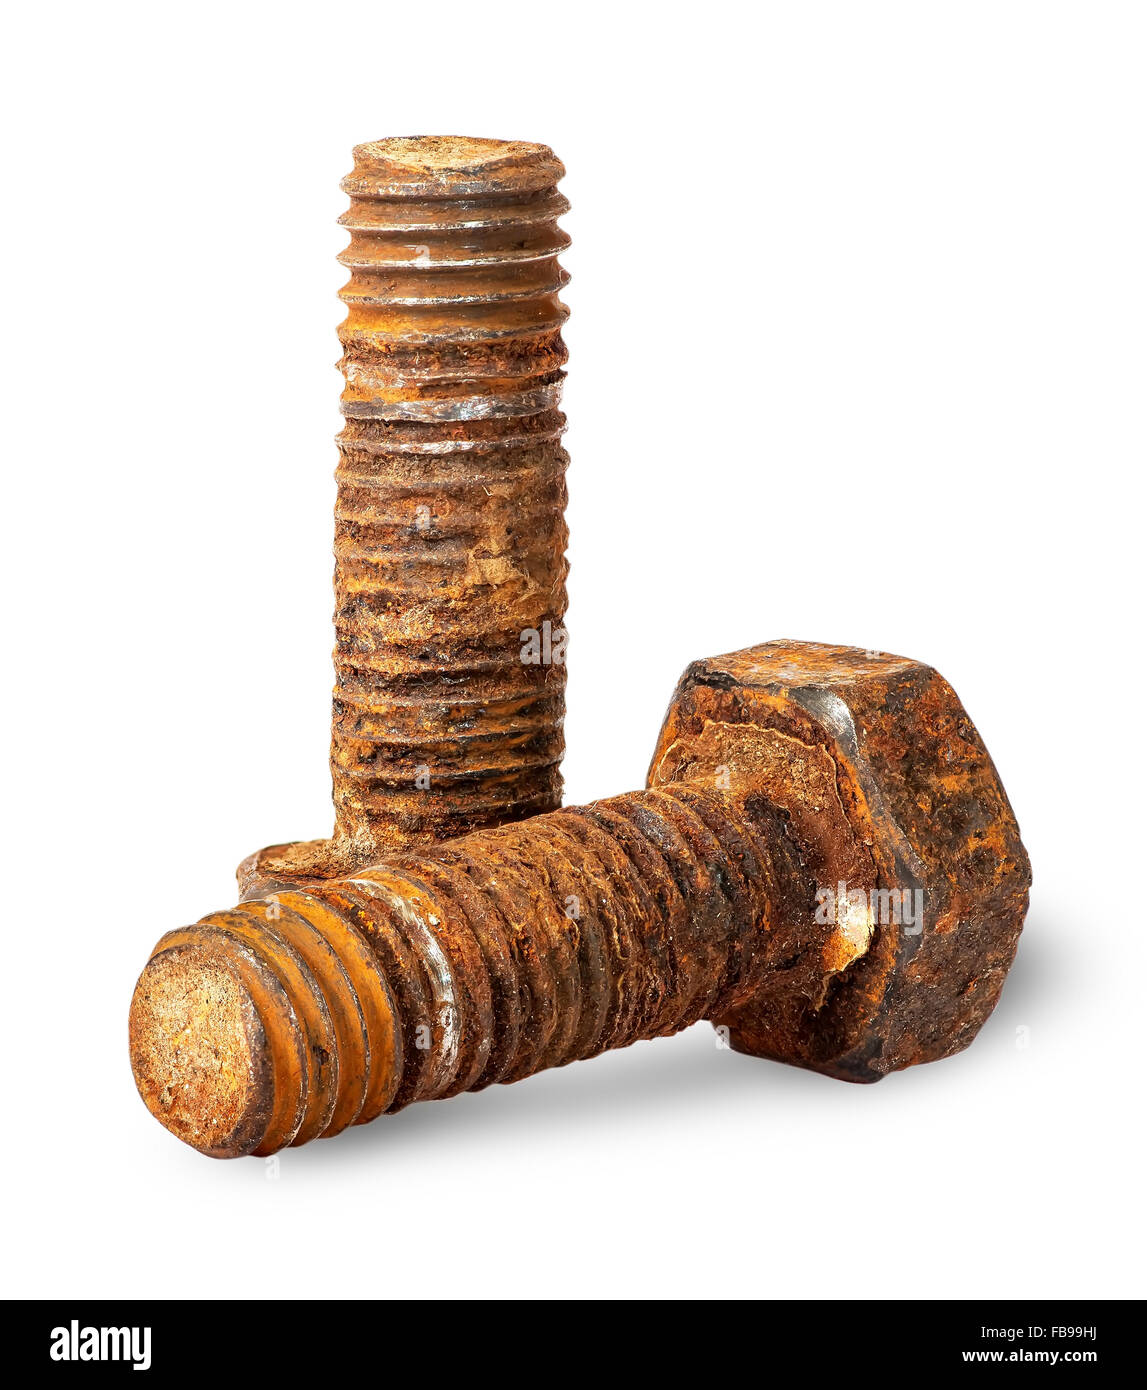 Two old rusty bolts of each other isolated on white background Stock Photo